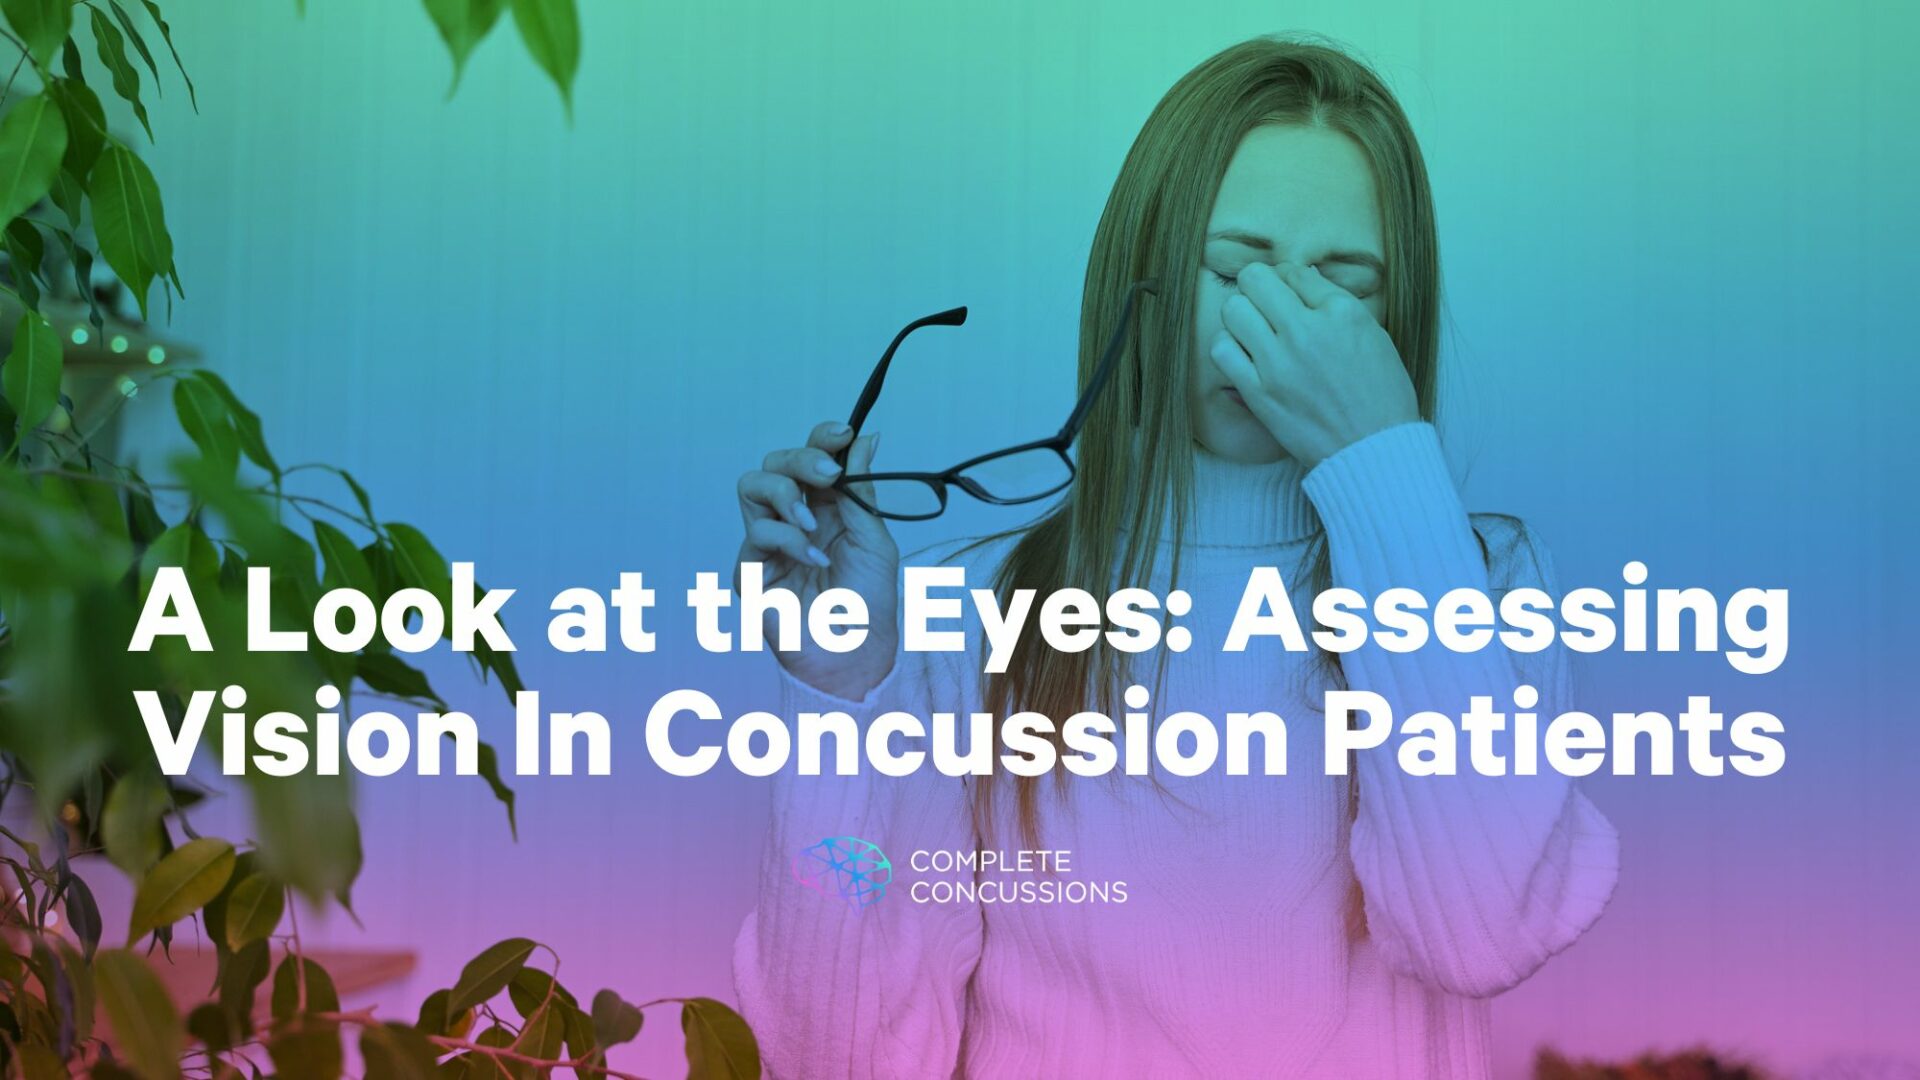 A Look at the Eyes: Assessing Vision In Concussion Patients